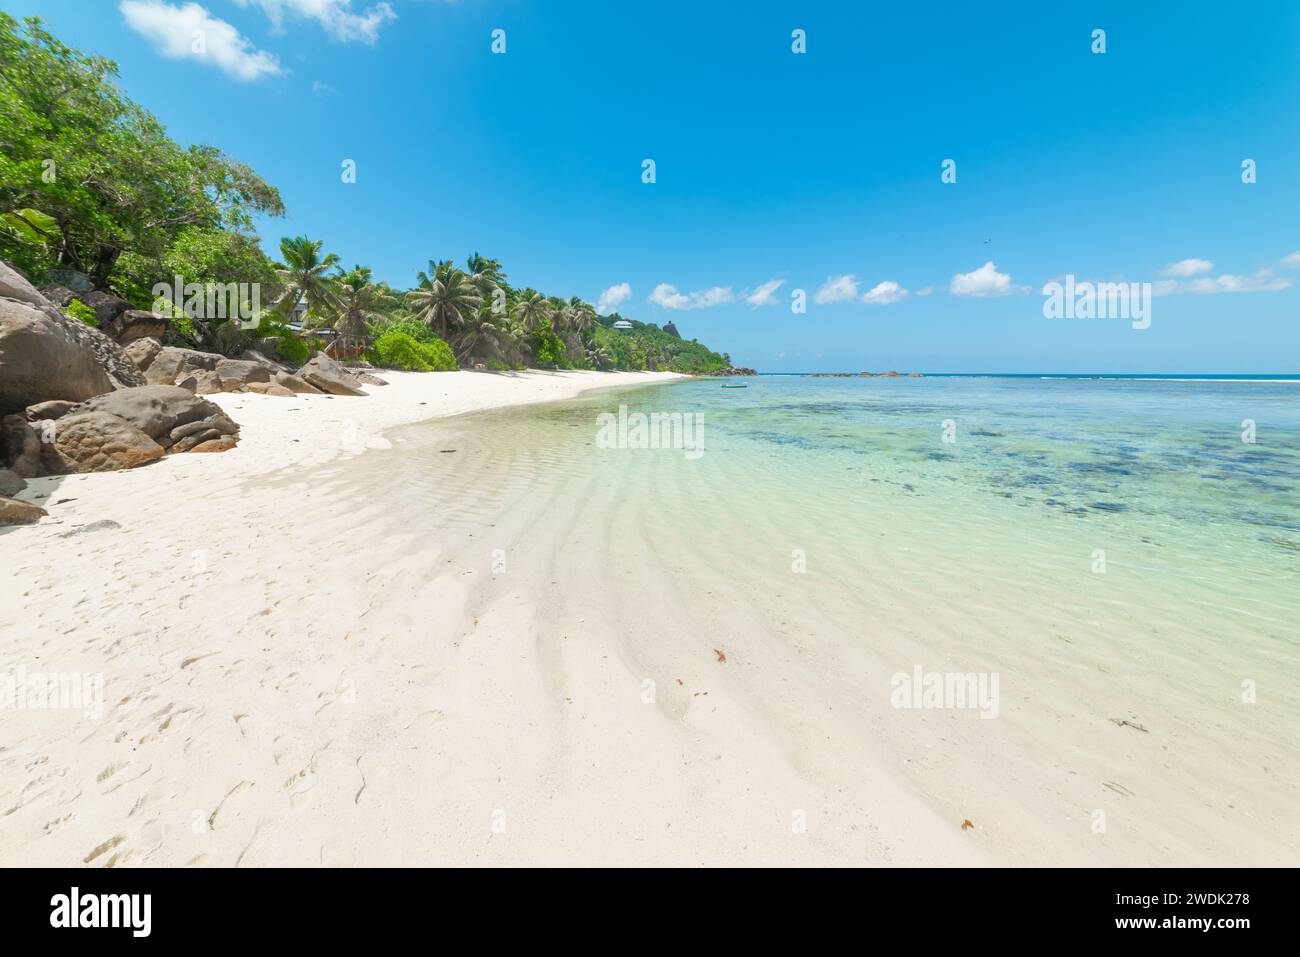 White sand and turquoise water in Anse Forbans beach. Mahe island, Seychelles Stock Photo